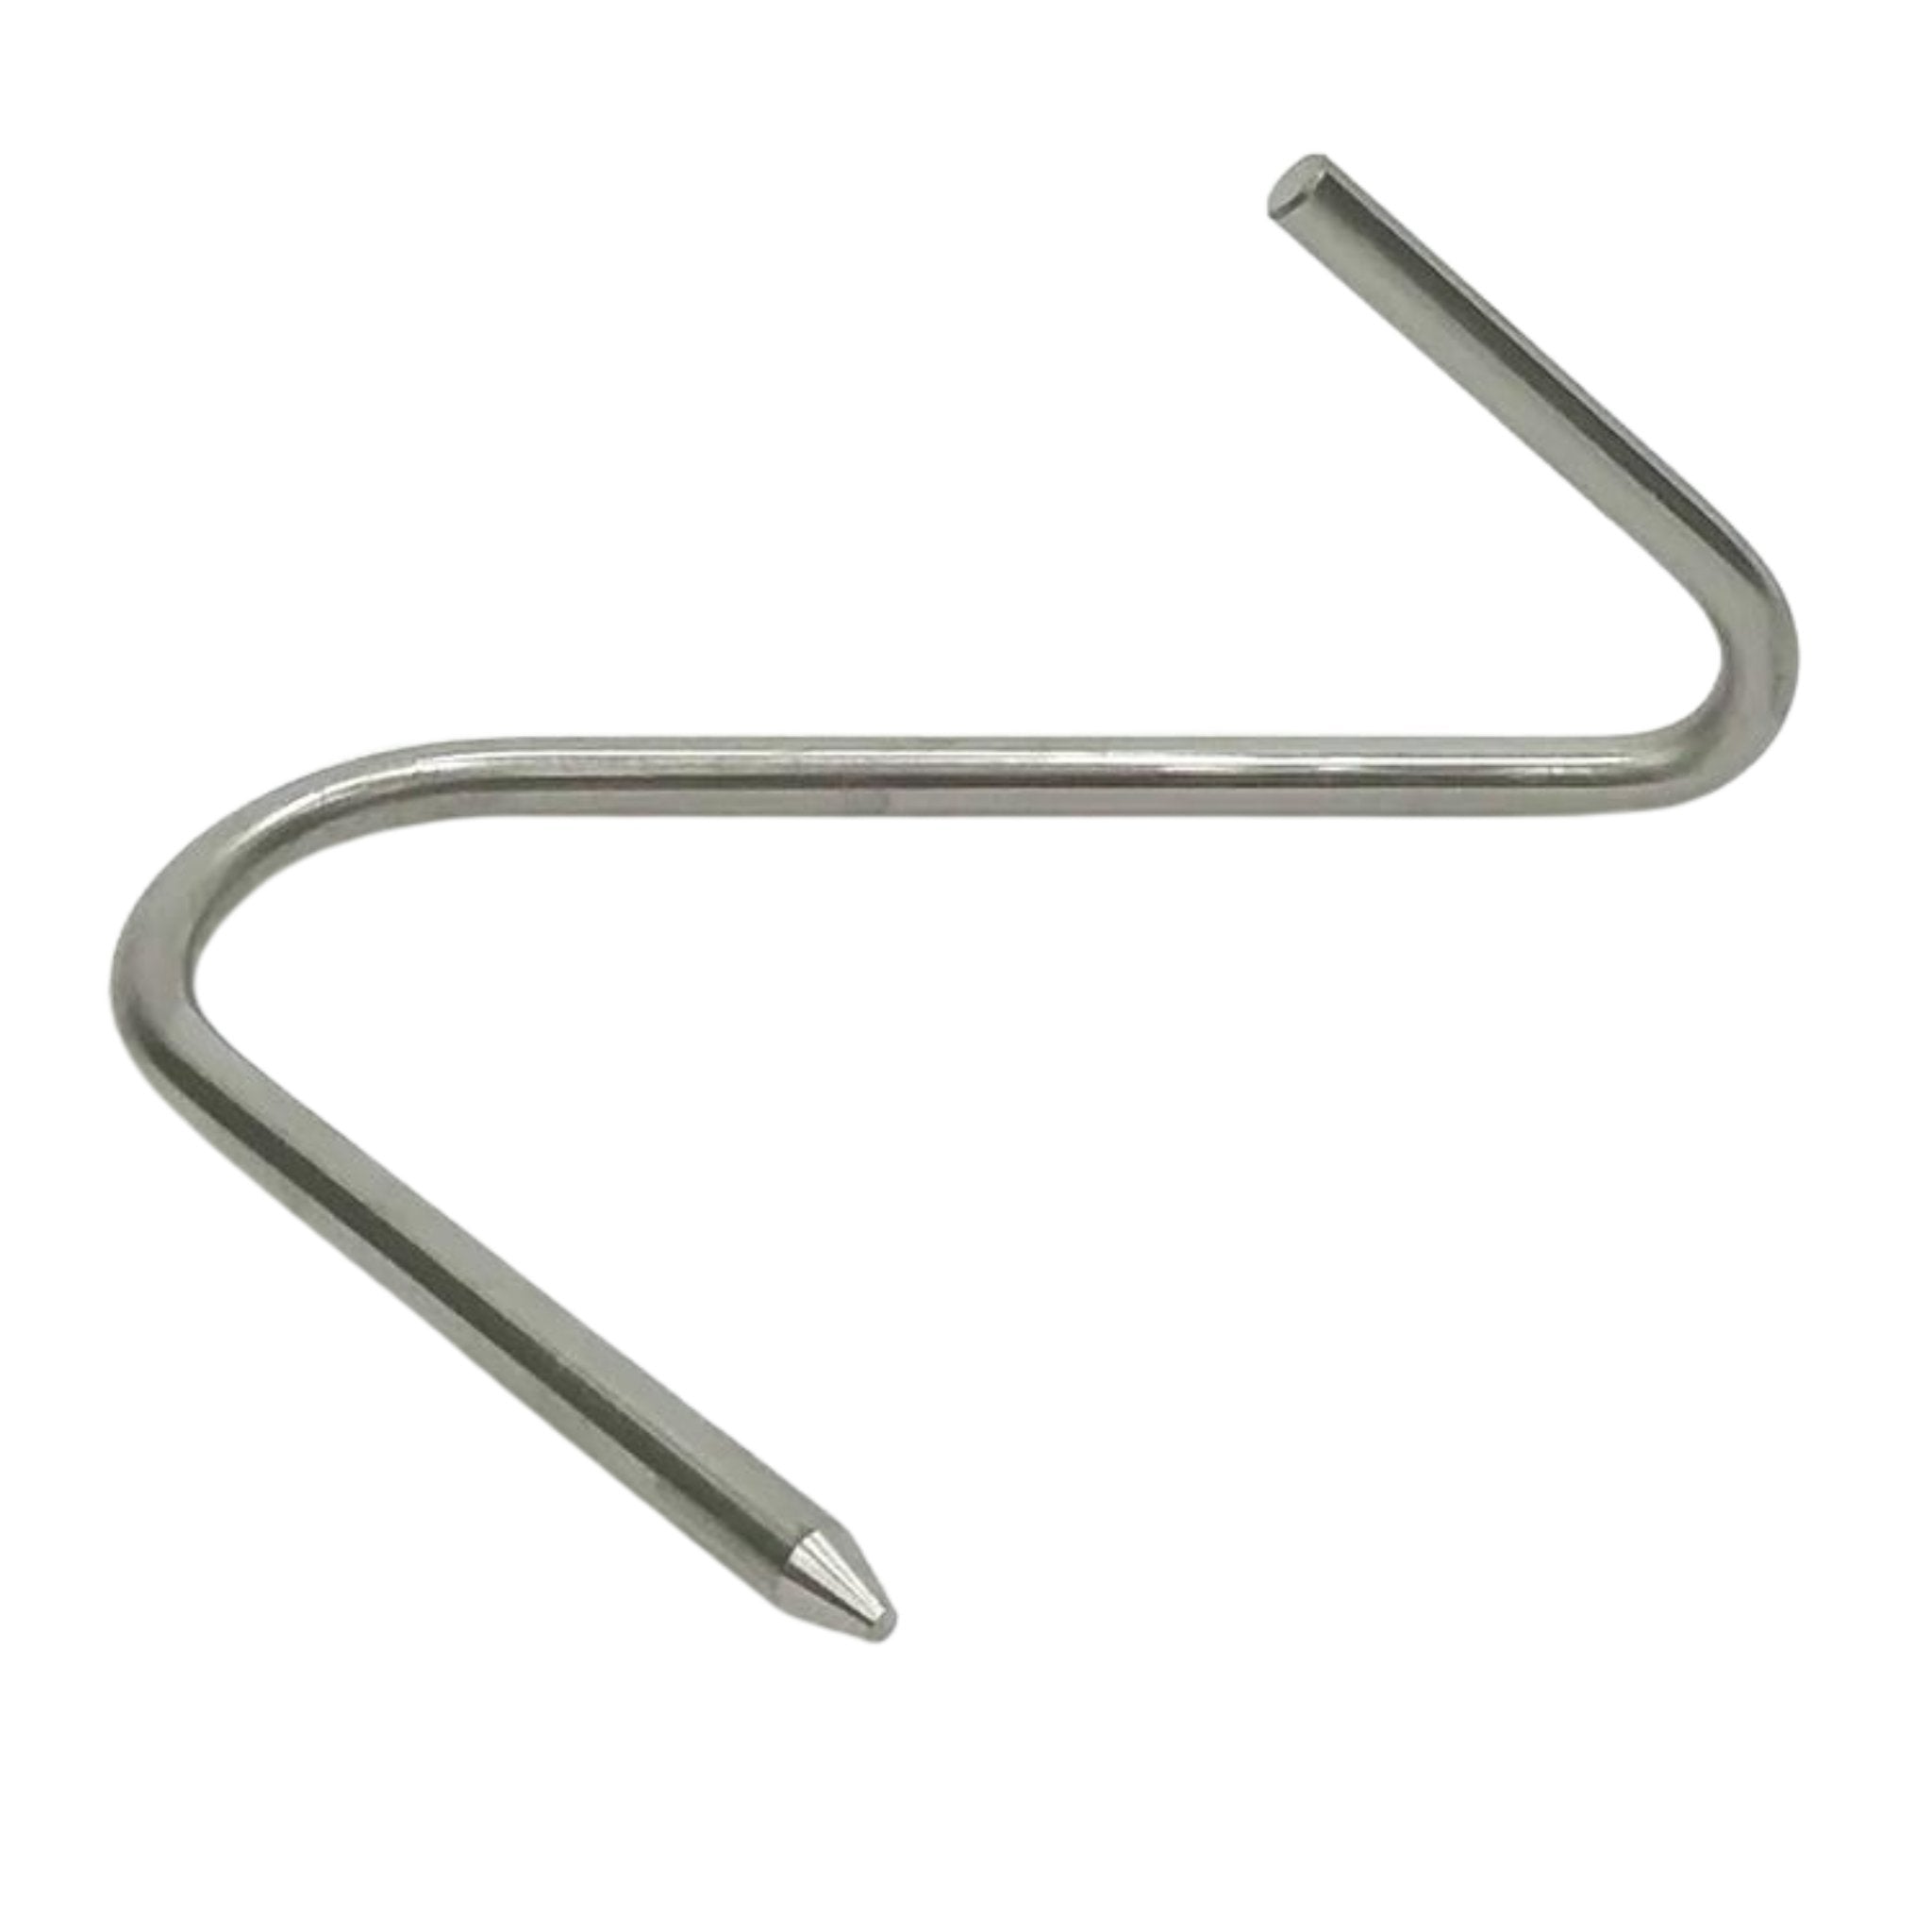 Meat Hooks 8'', Heavy Duty Stainless Steel Butcher Hook, S-Hooks for Meat  Processing, Hanging Beef, Smoking Ribs, Drying (5Pack)